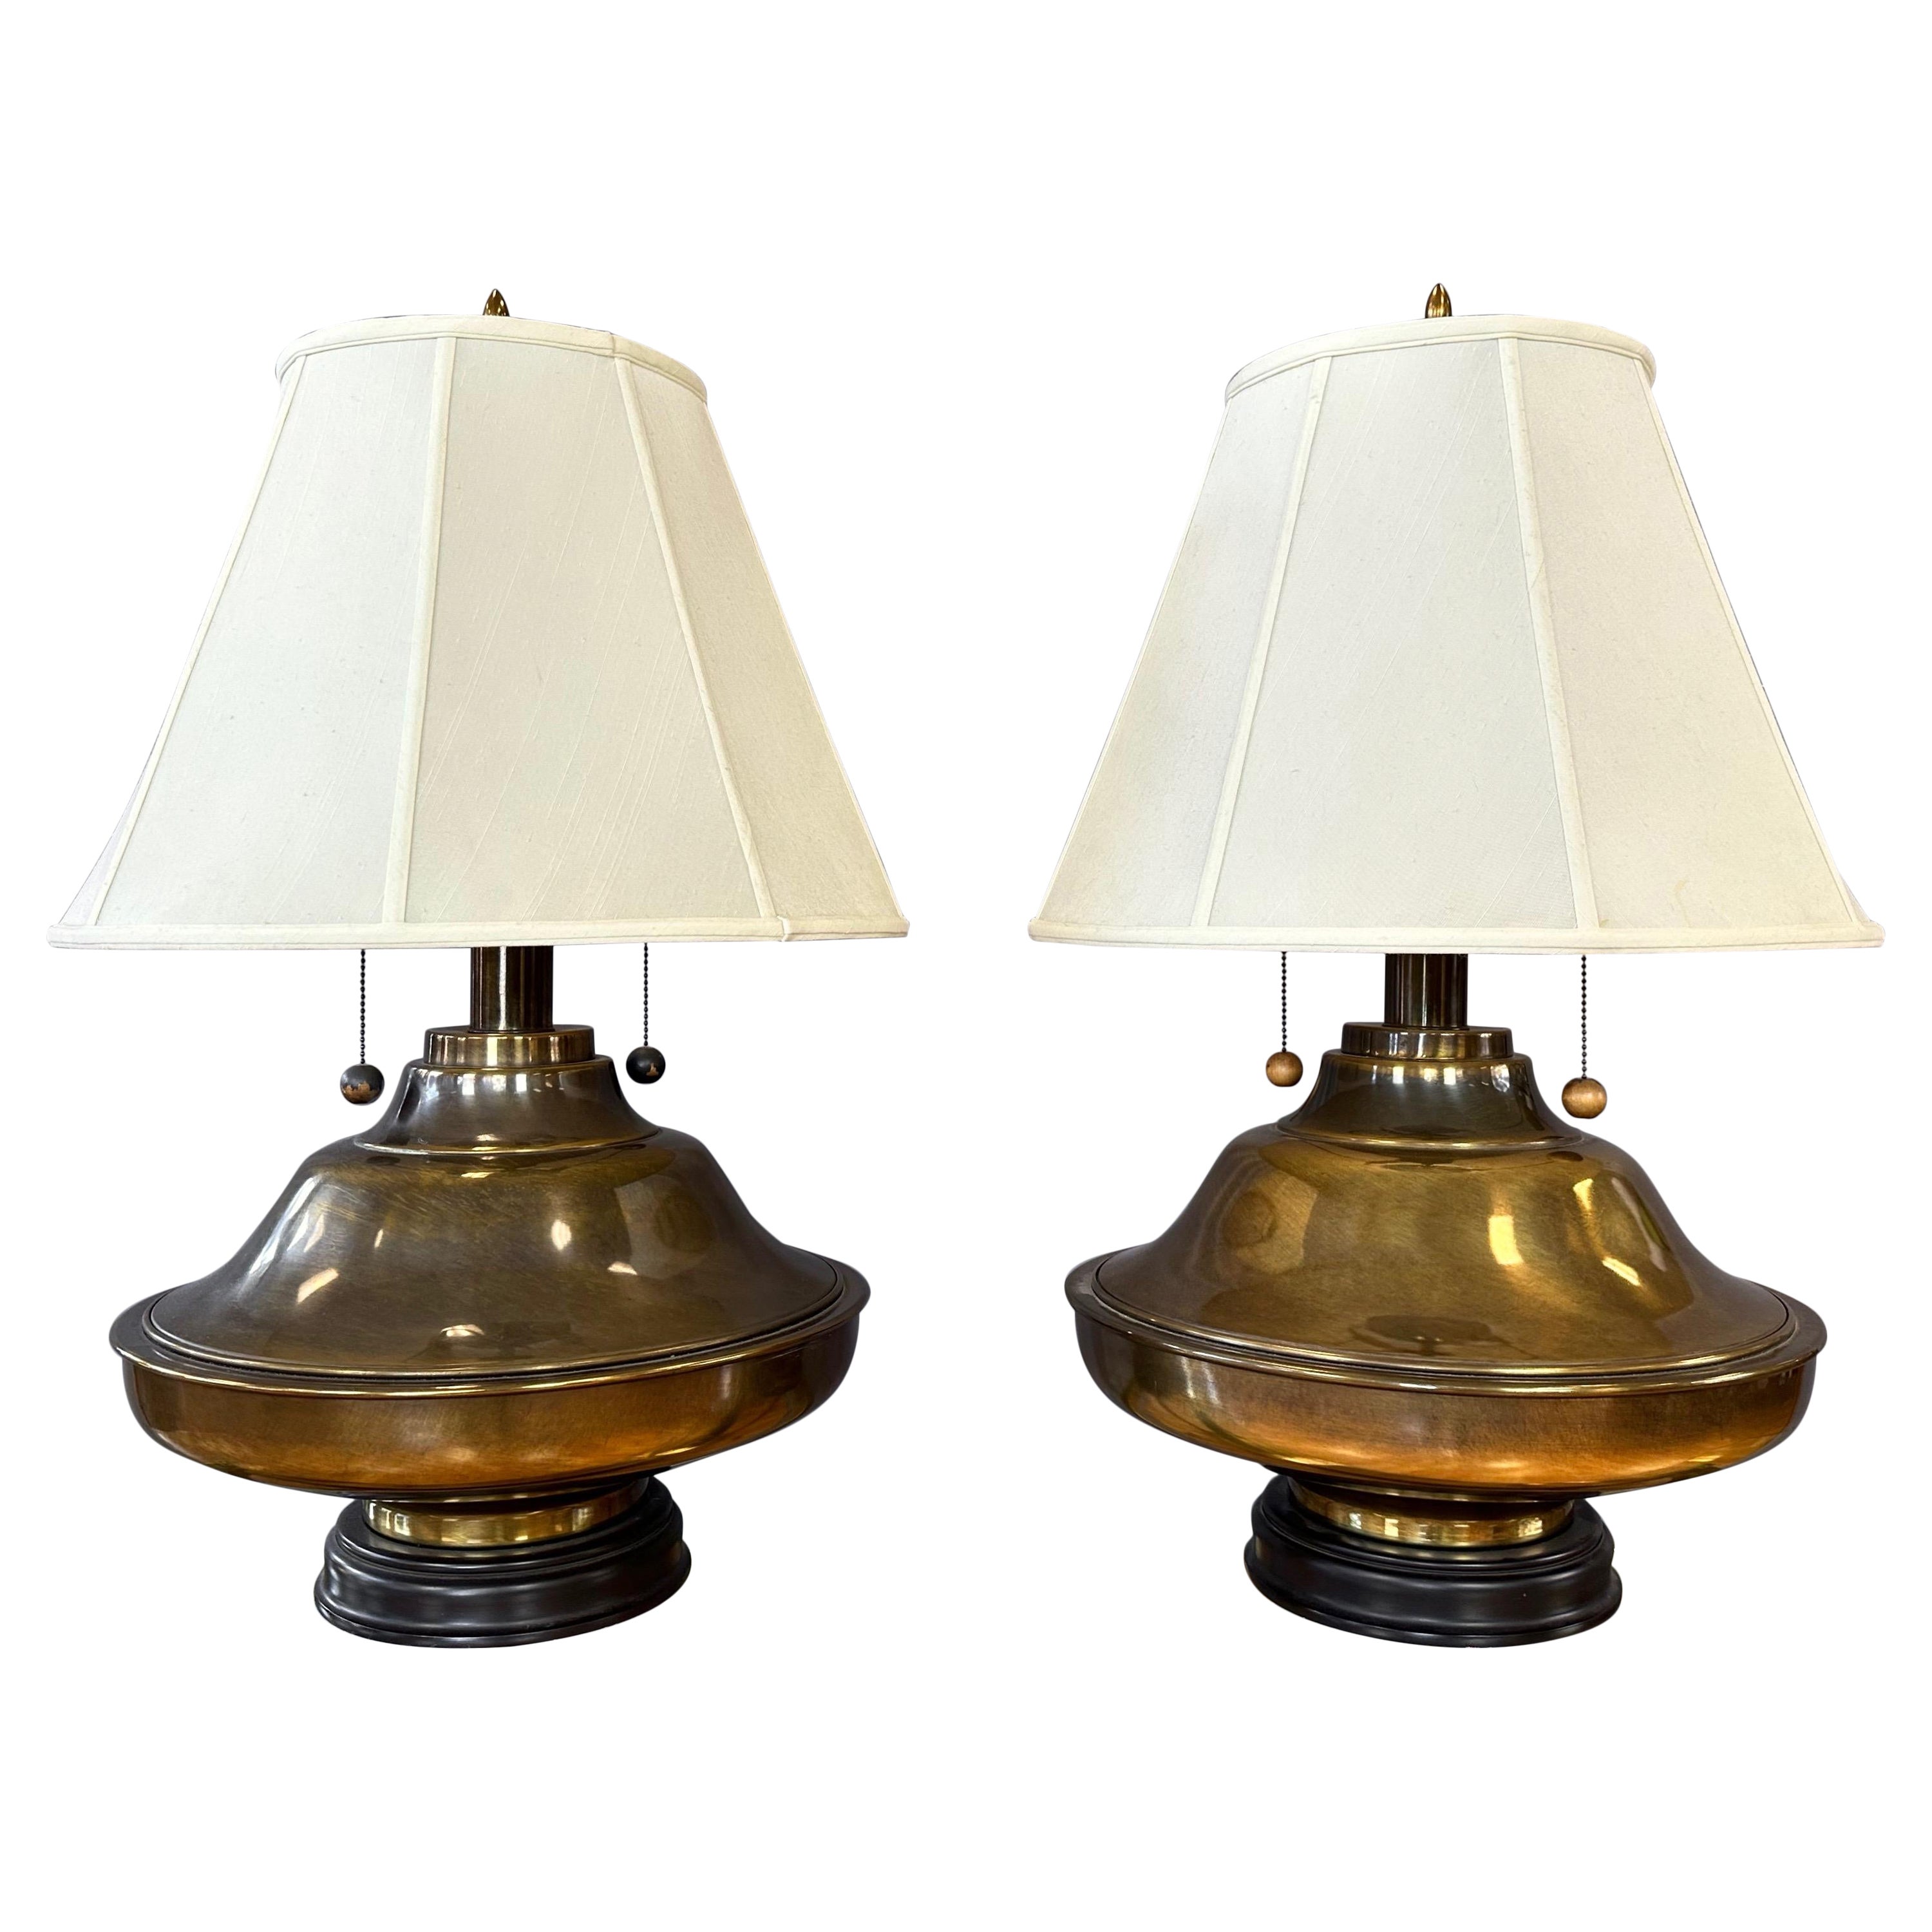 Pair of Monumental Marbro-Style Antiqued Brass Table Lamps with Shades, 1960s